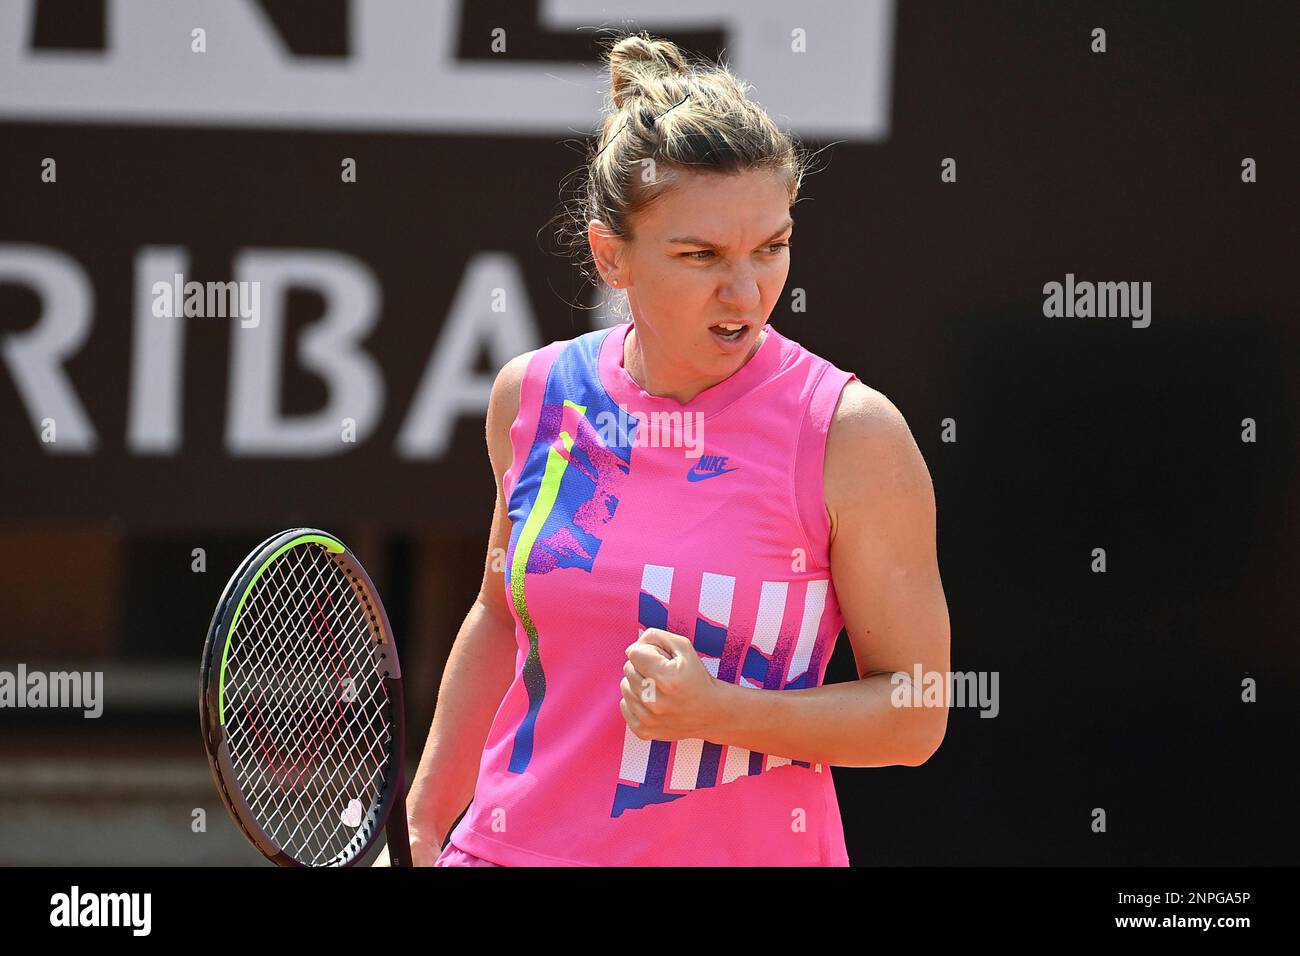 Simona Halep celebrates after winning a point to Yulia Putintseva during their quarterfinal match at the Italian Open tennis tournament, in Rome, Saturday, Sept